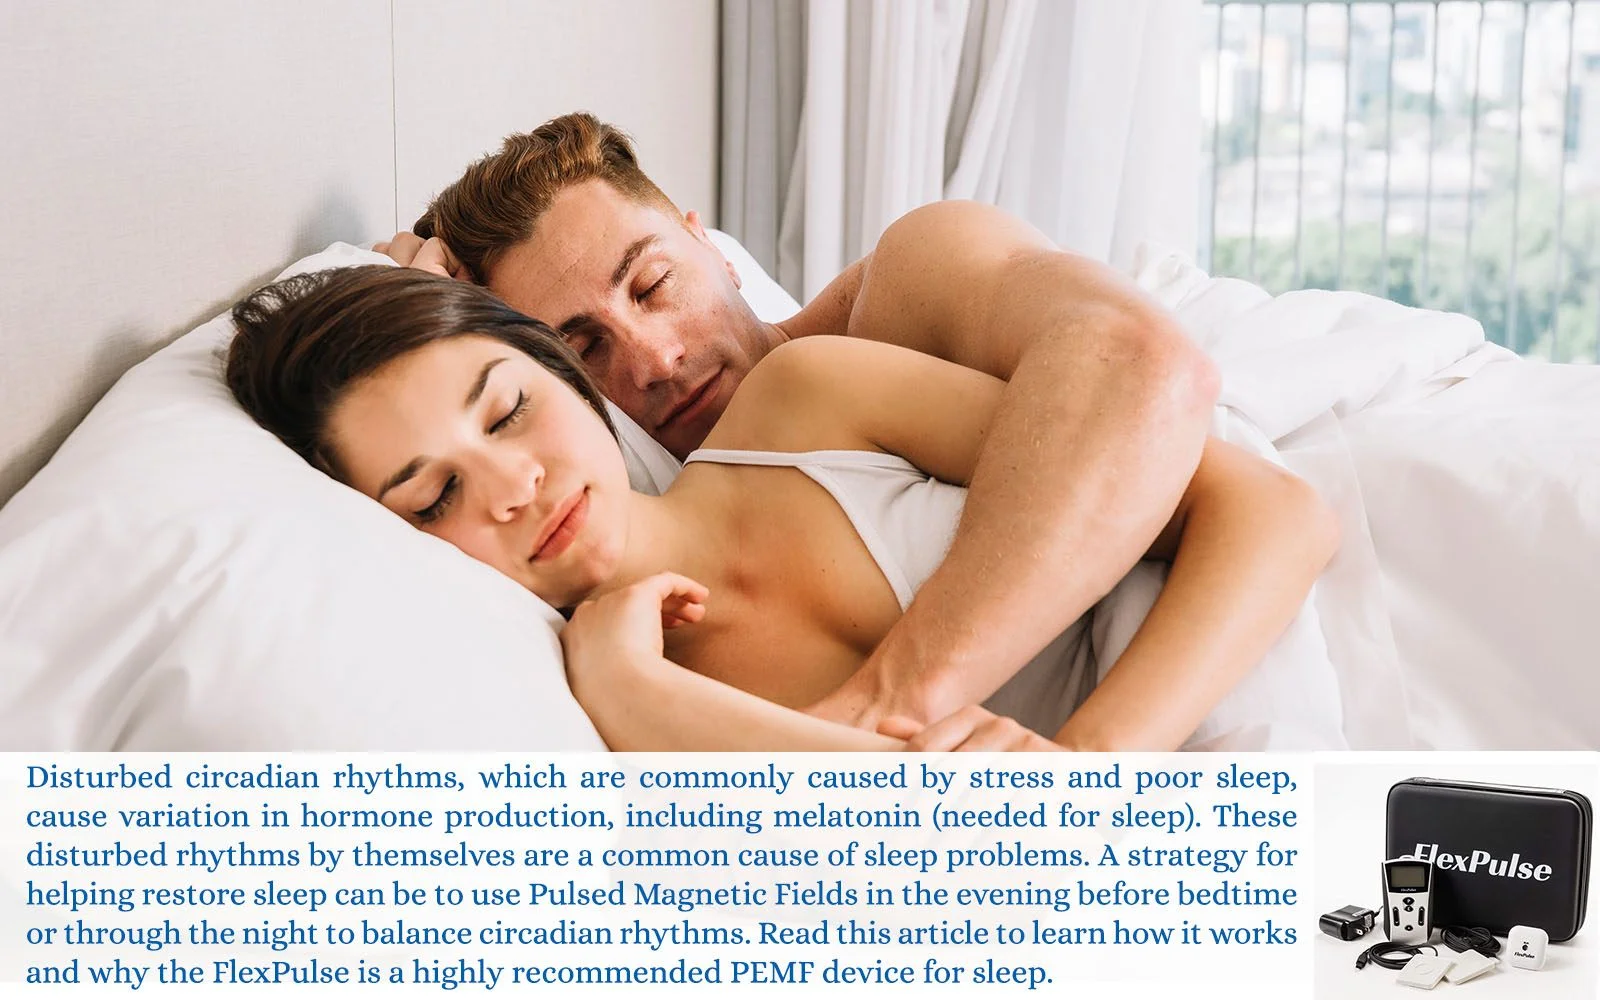 Woman and man lay comfortable falling asleep in bed. The FlexPulse actively helps to balance circadian rhythms, and limit disturbed circadian rhythms.